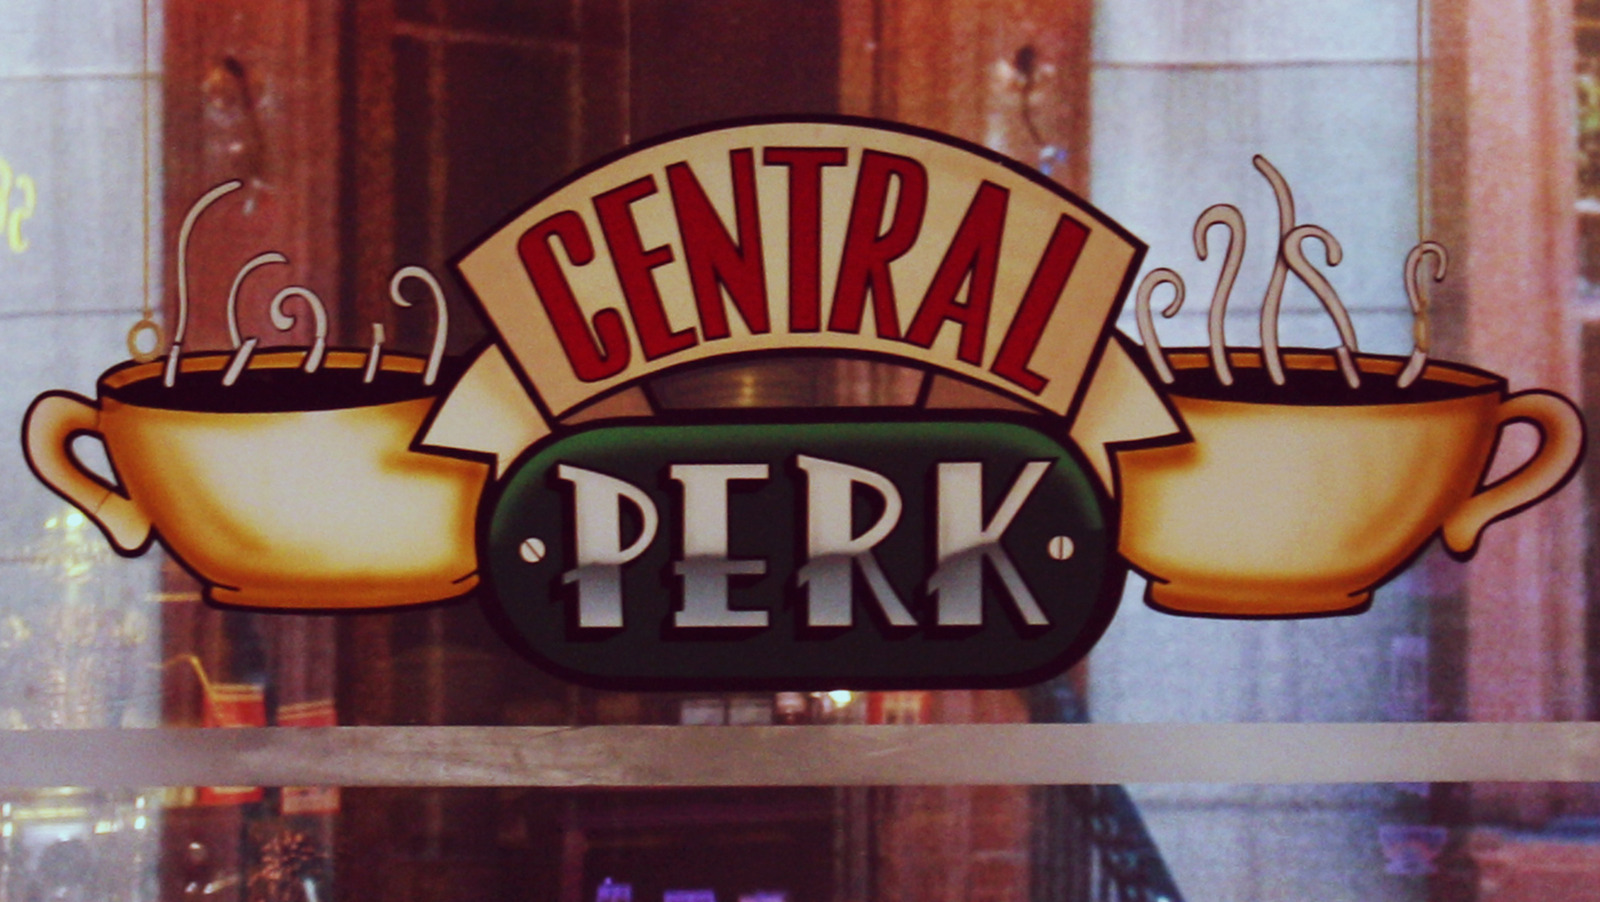 Central Perk coffee shop inspired by 'Friends' is opening soon in